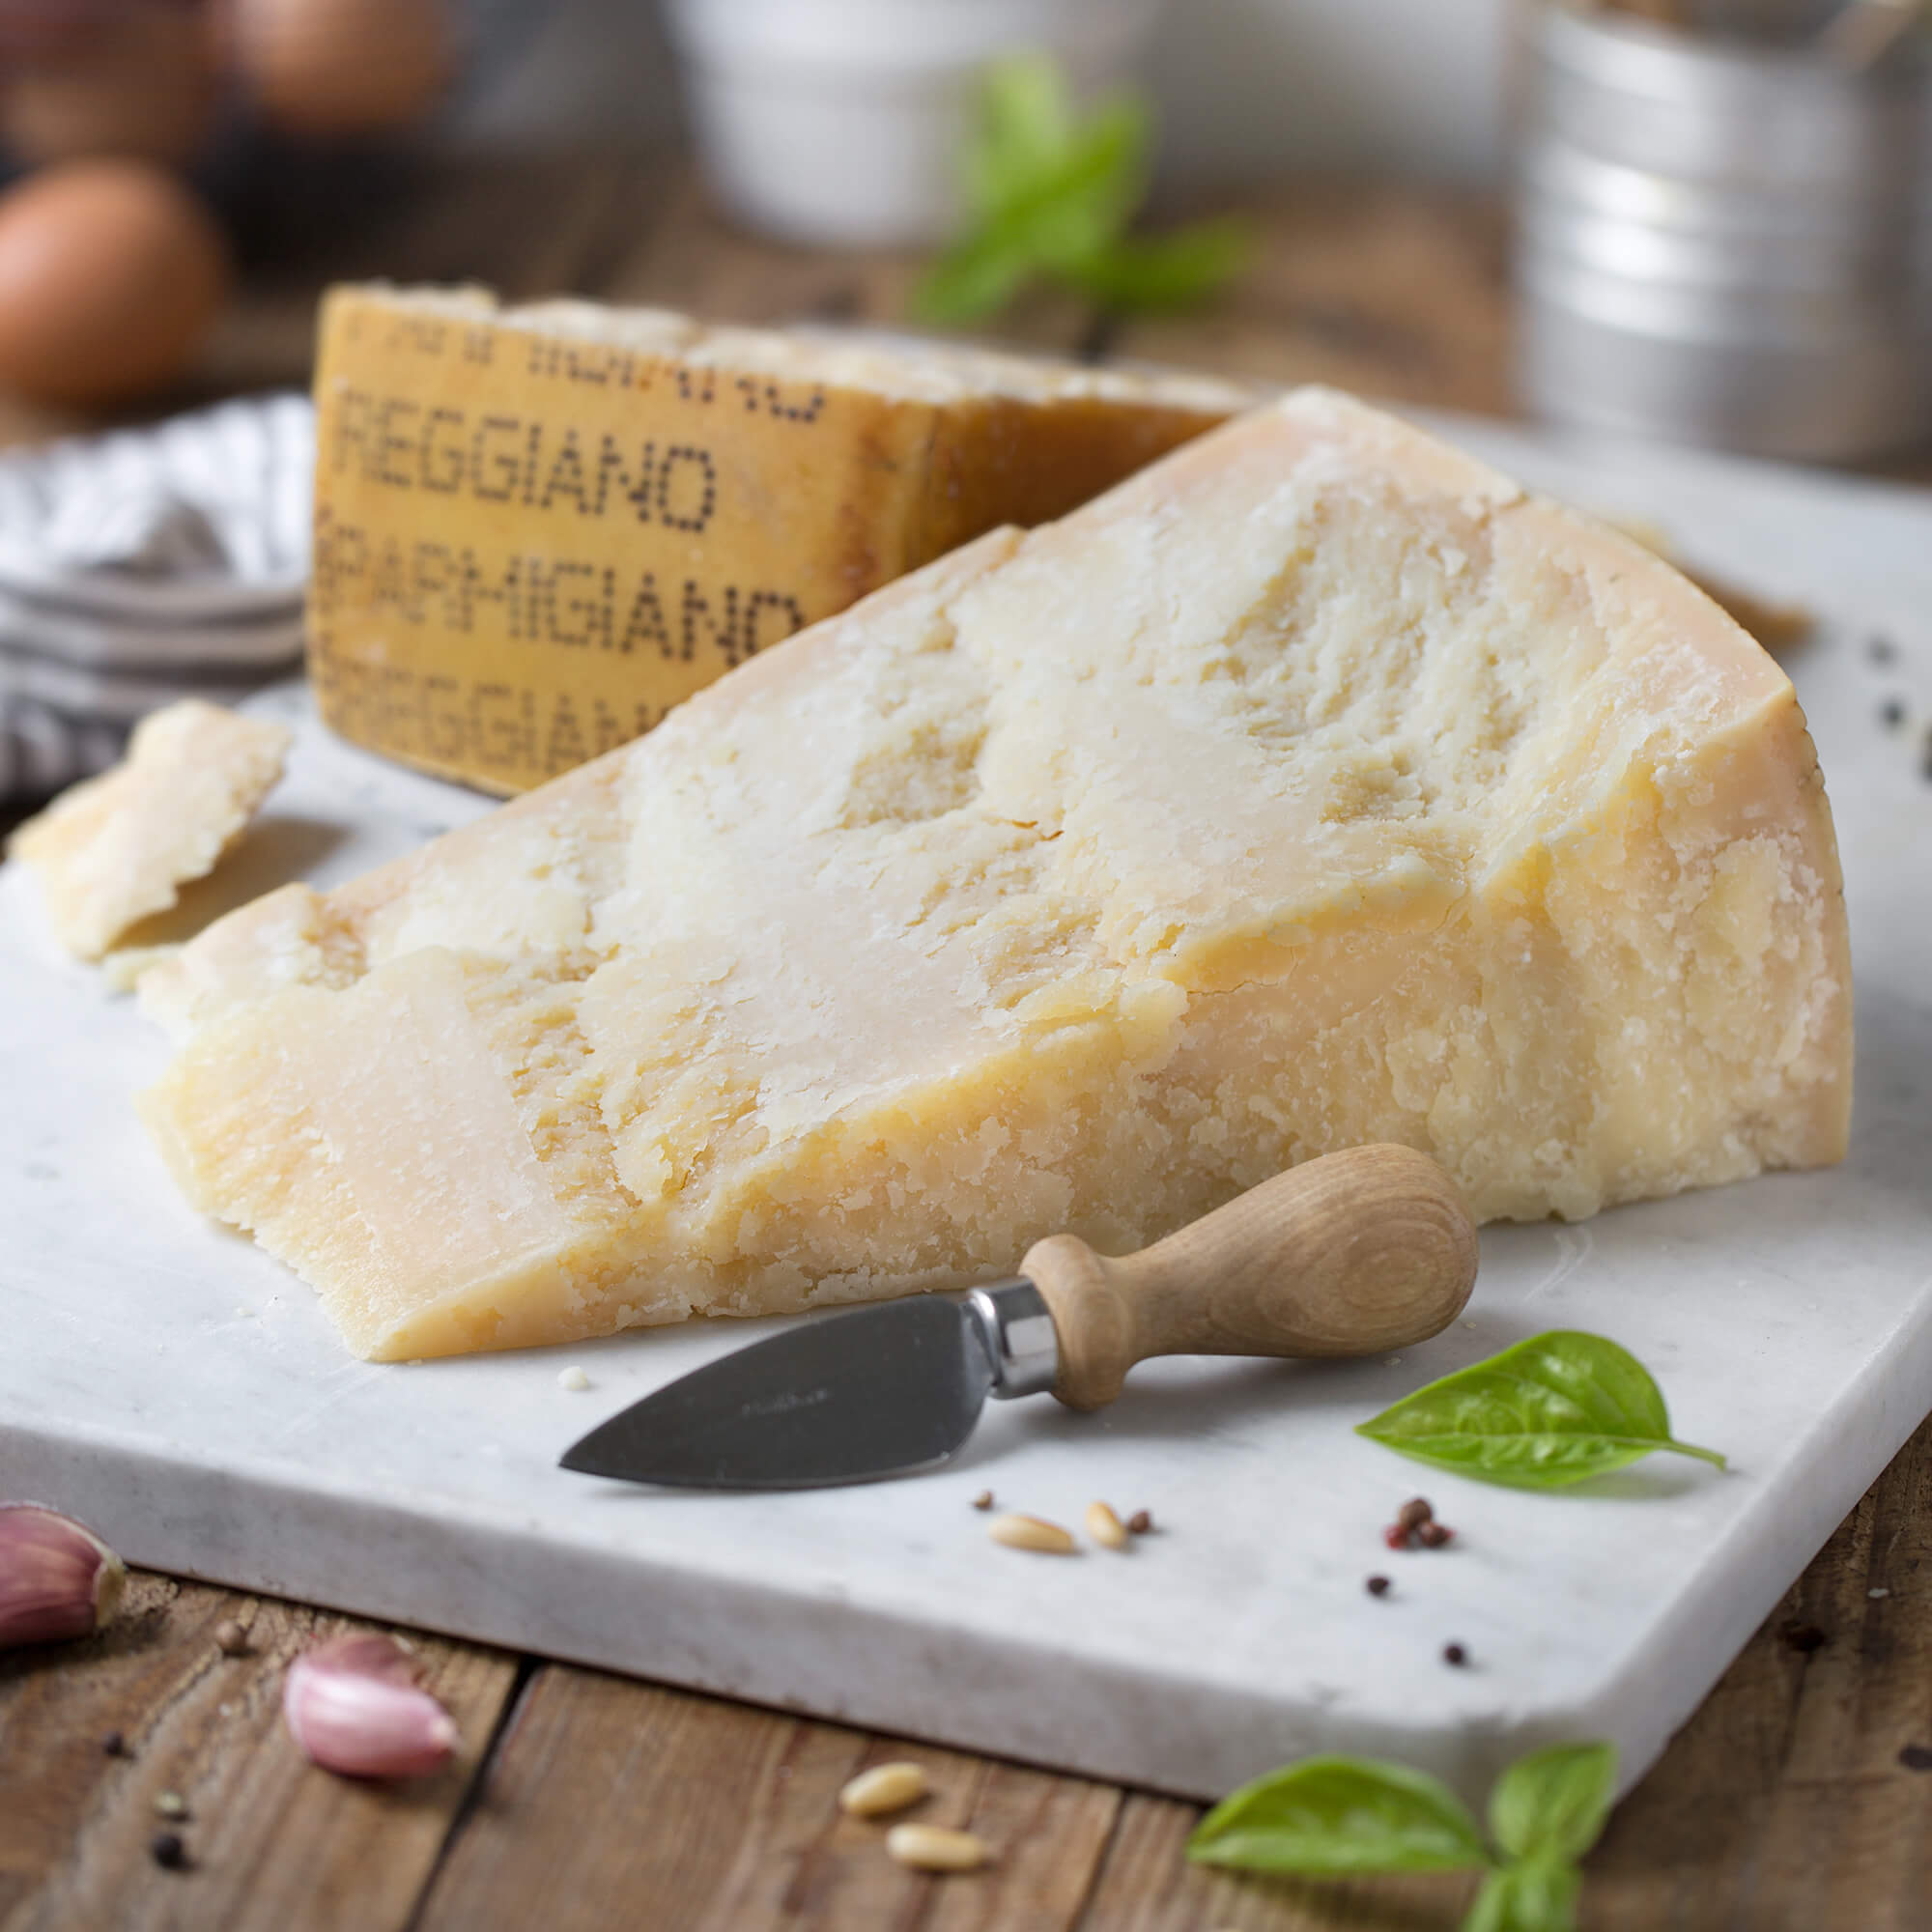 Tris Parmigiano Reggiano PDO 48, 60, 72 months  Emilia Food Love - EMILIA  FOOD LOVE Selected with love in Italy